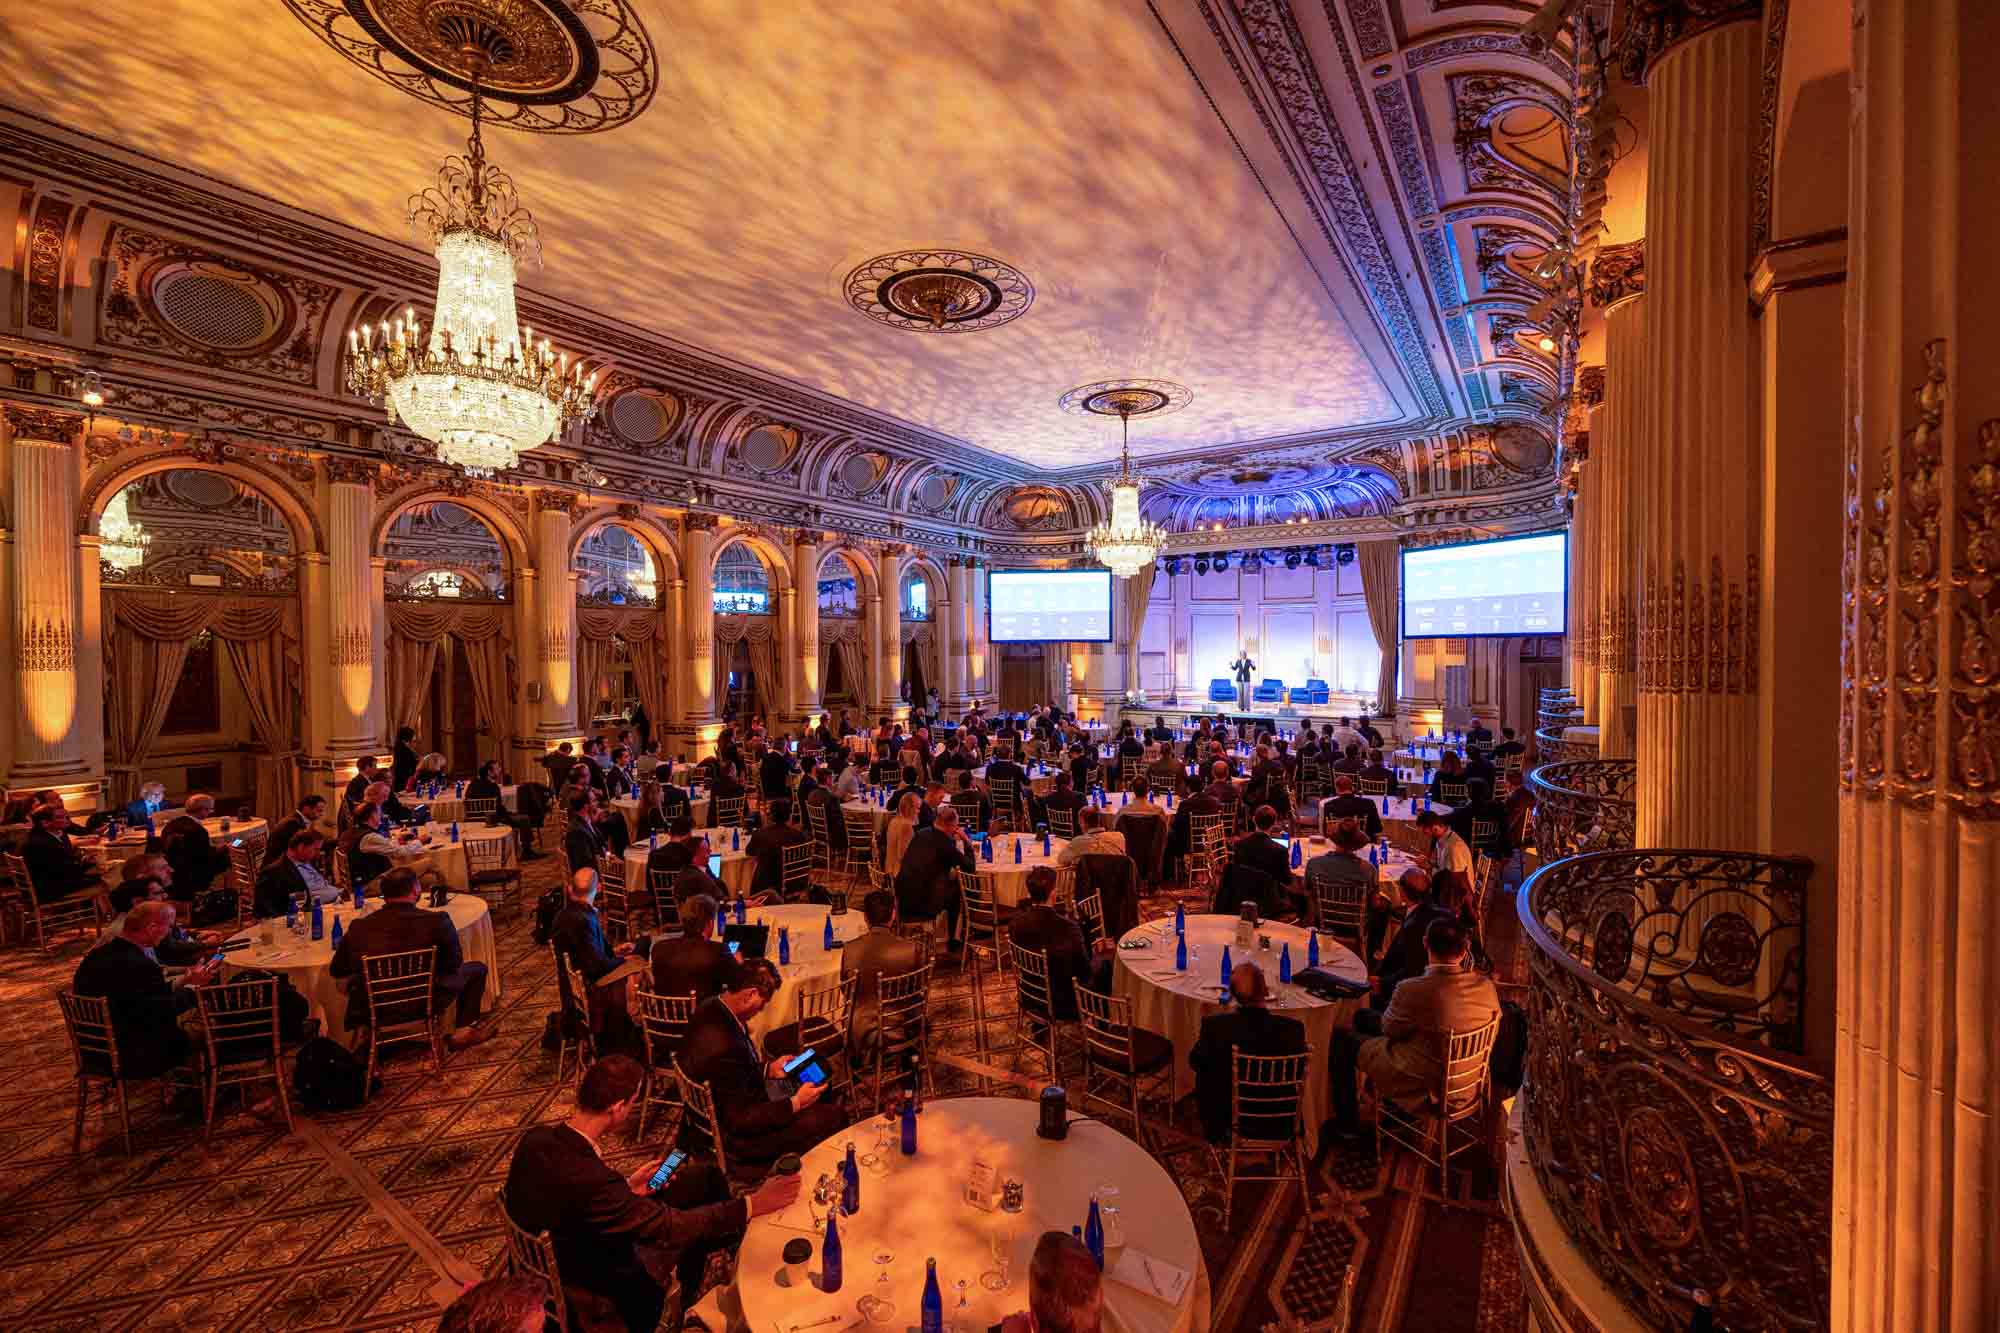 Corporate Event Keynote at the Plaza Hotel Ballroom in NYC